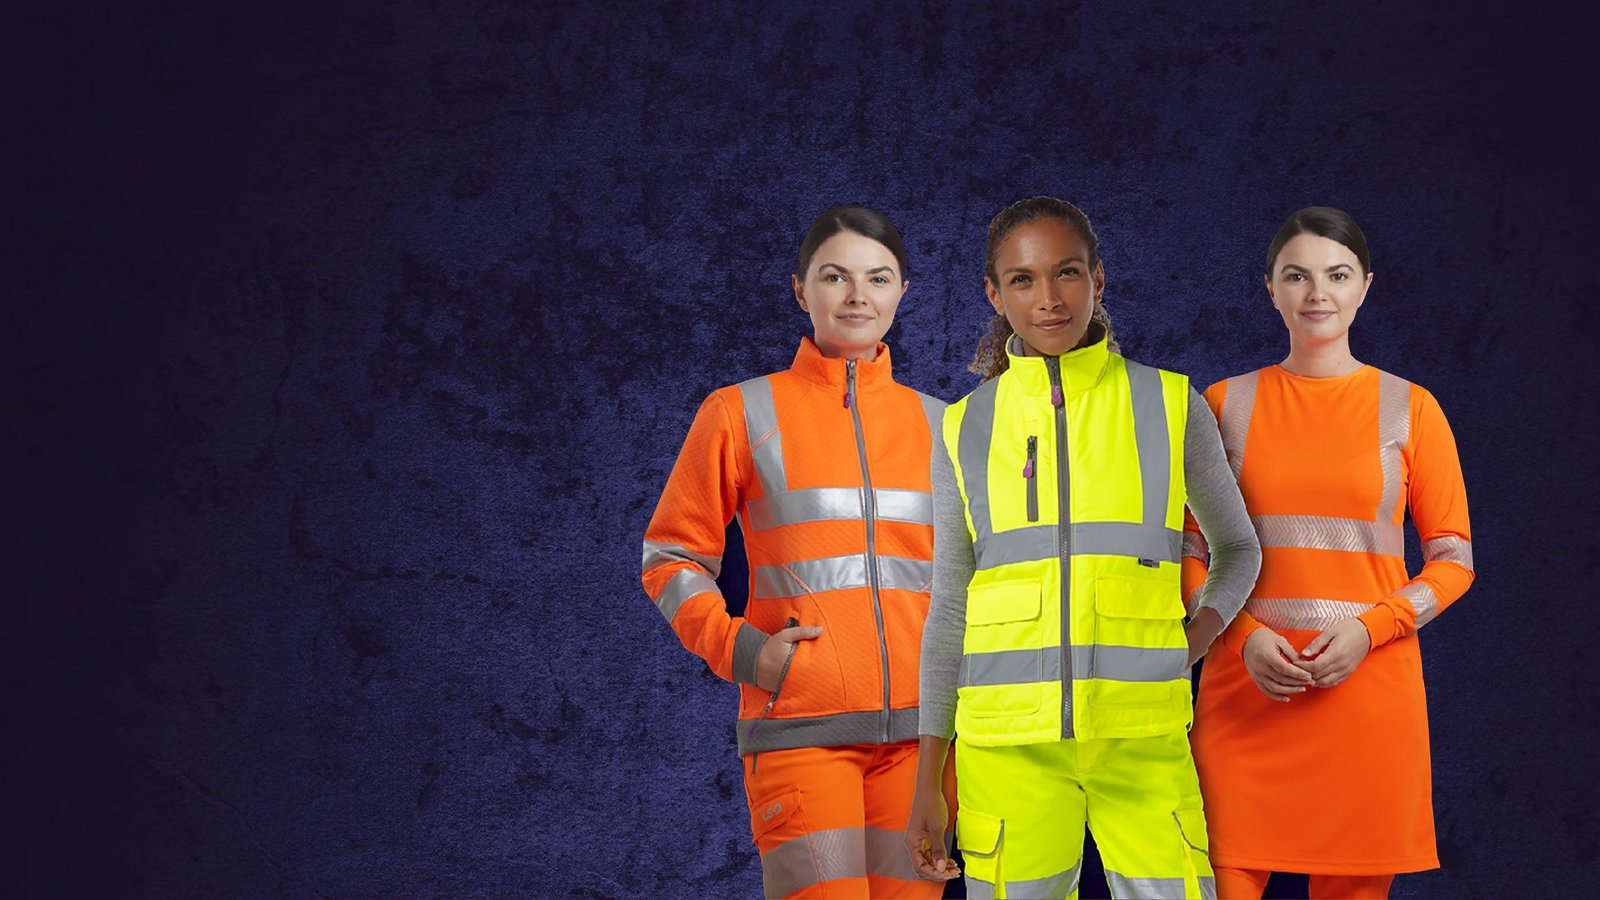 How workwear can reflect diversity